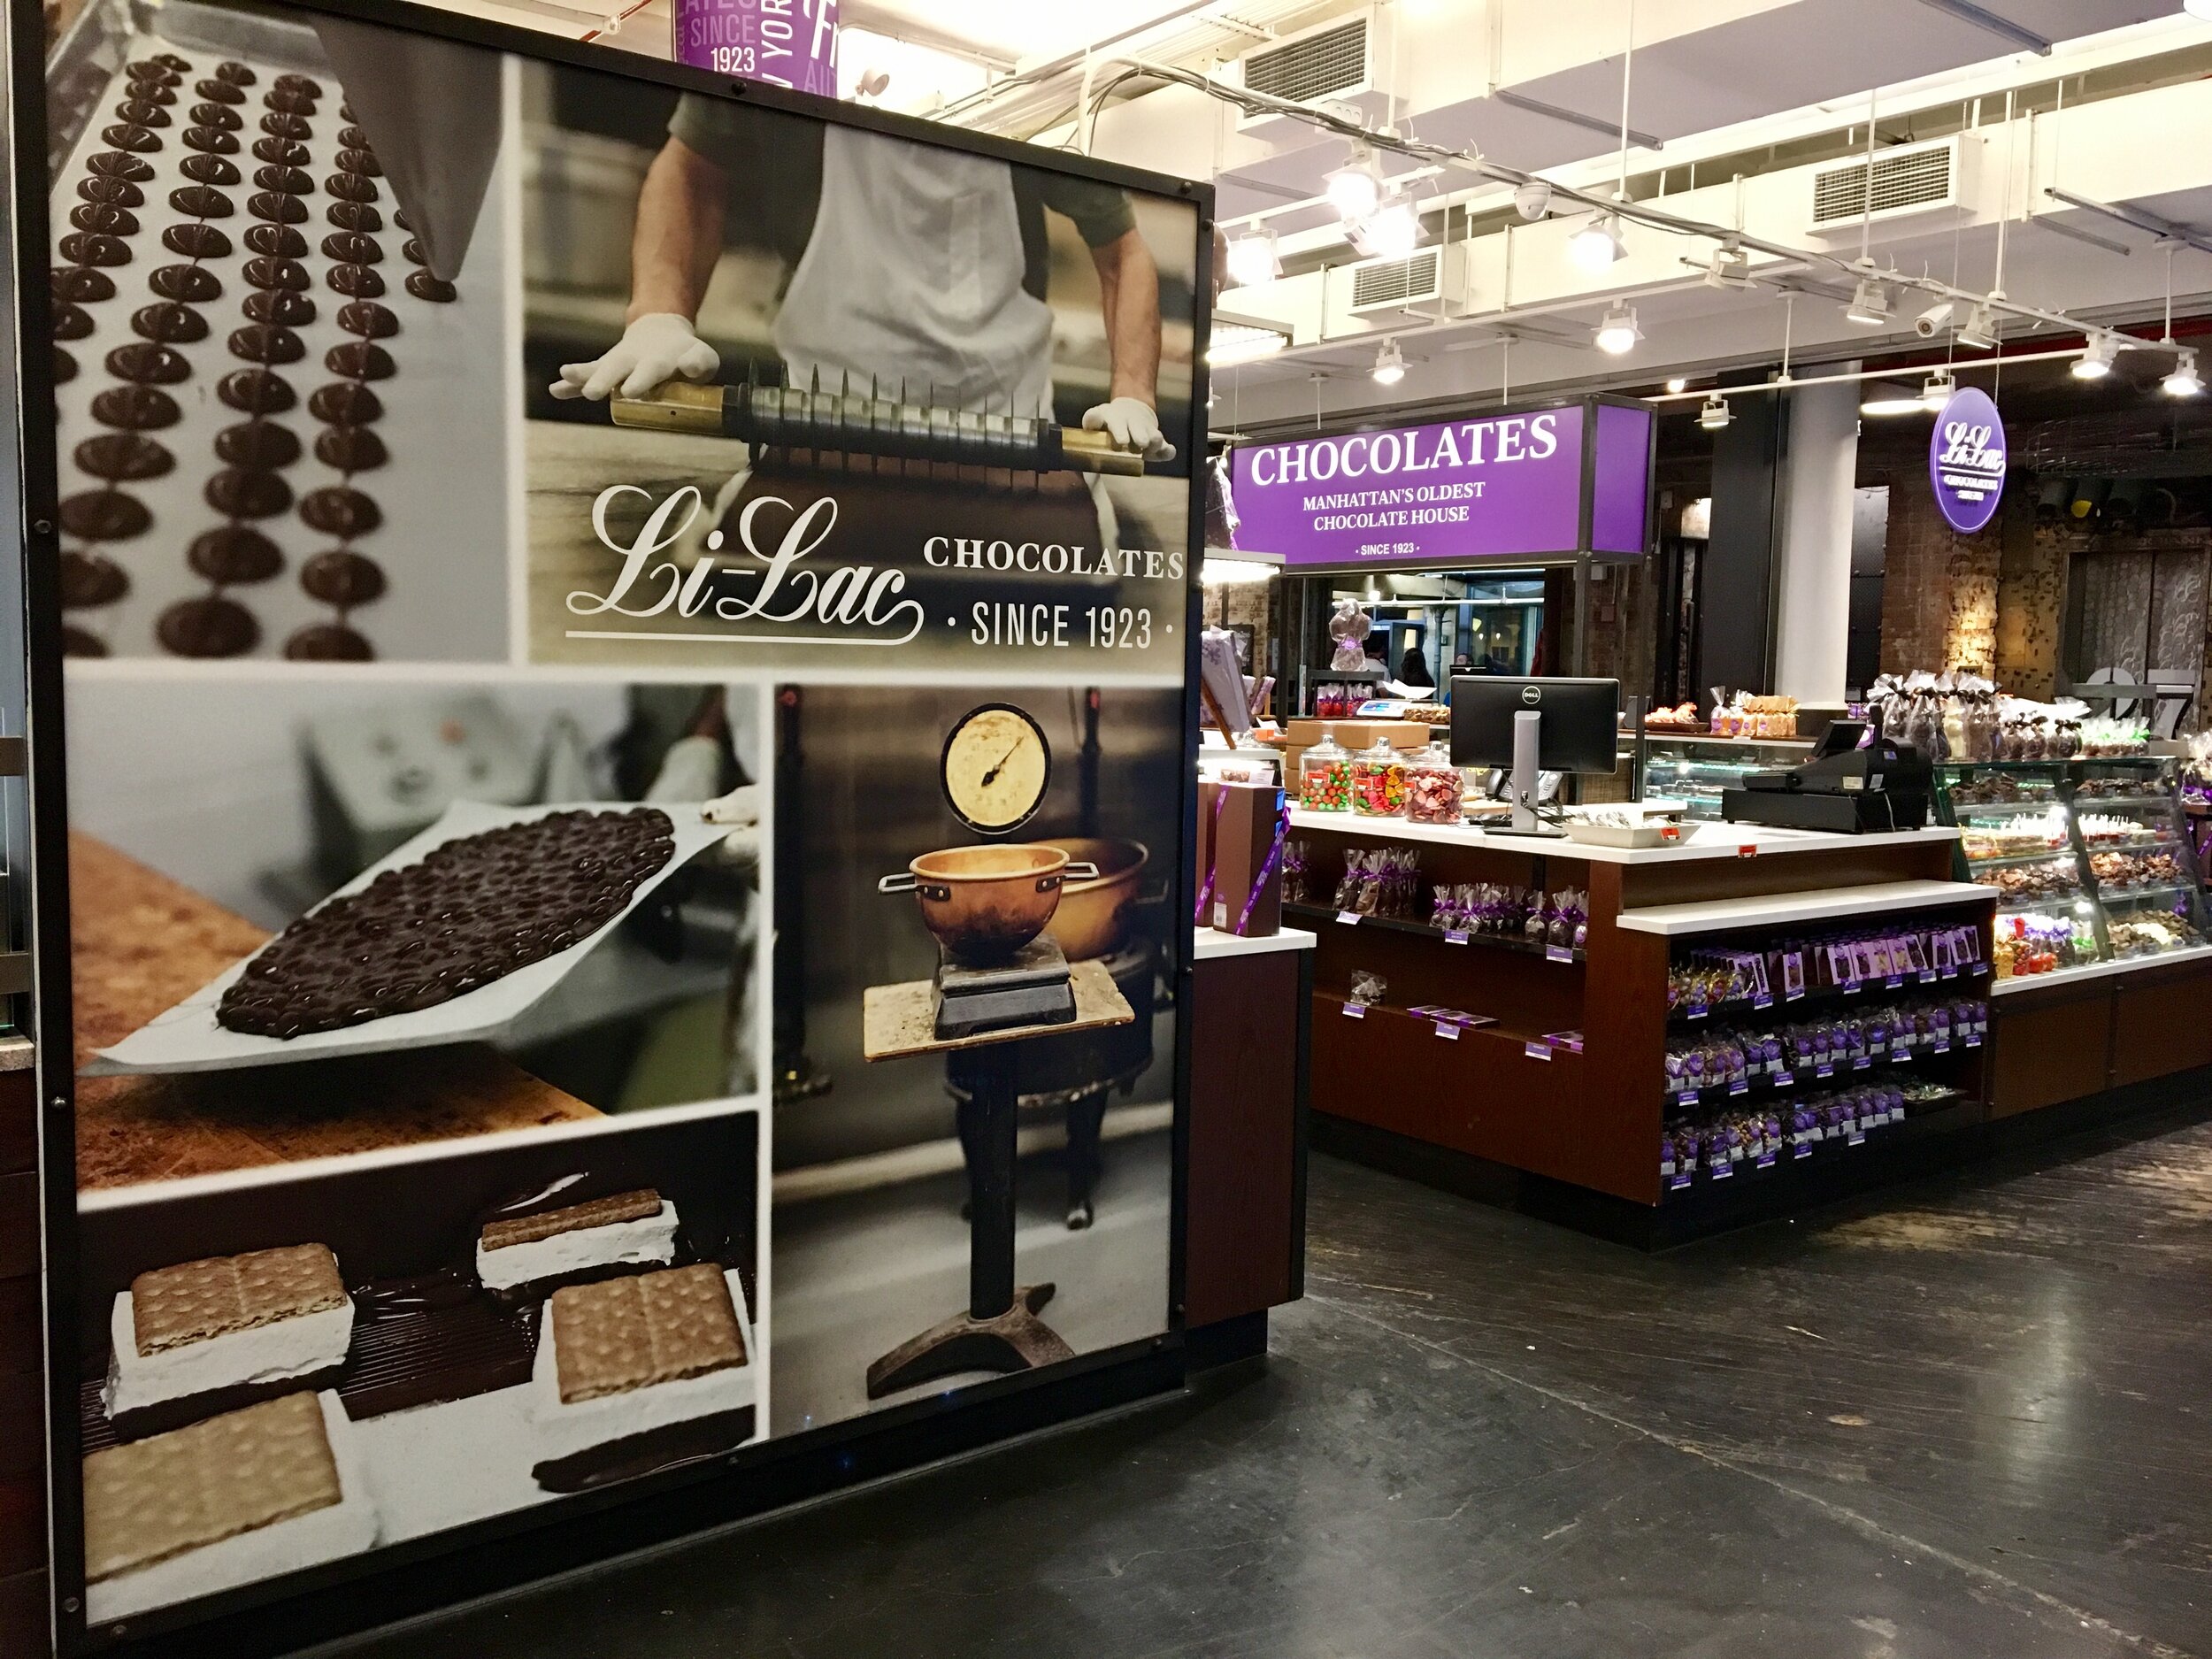 Lilac Chocolate kiosk at Chelsea Market